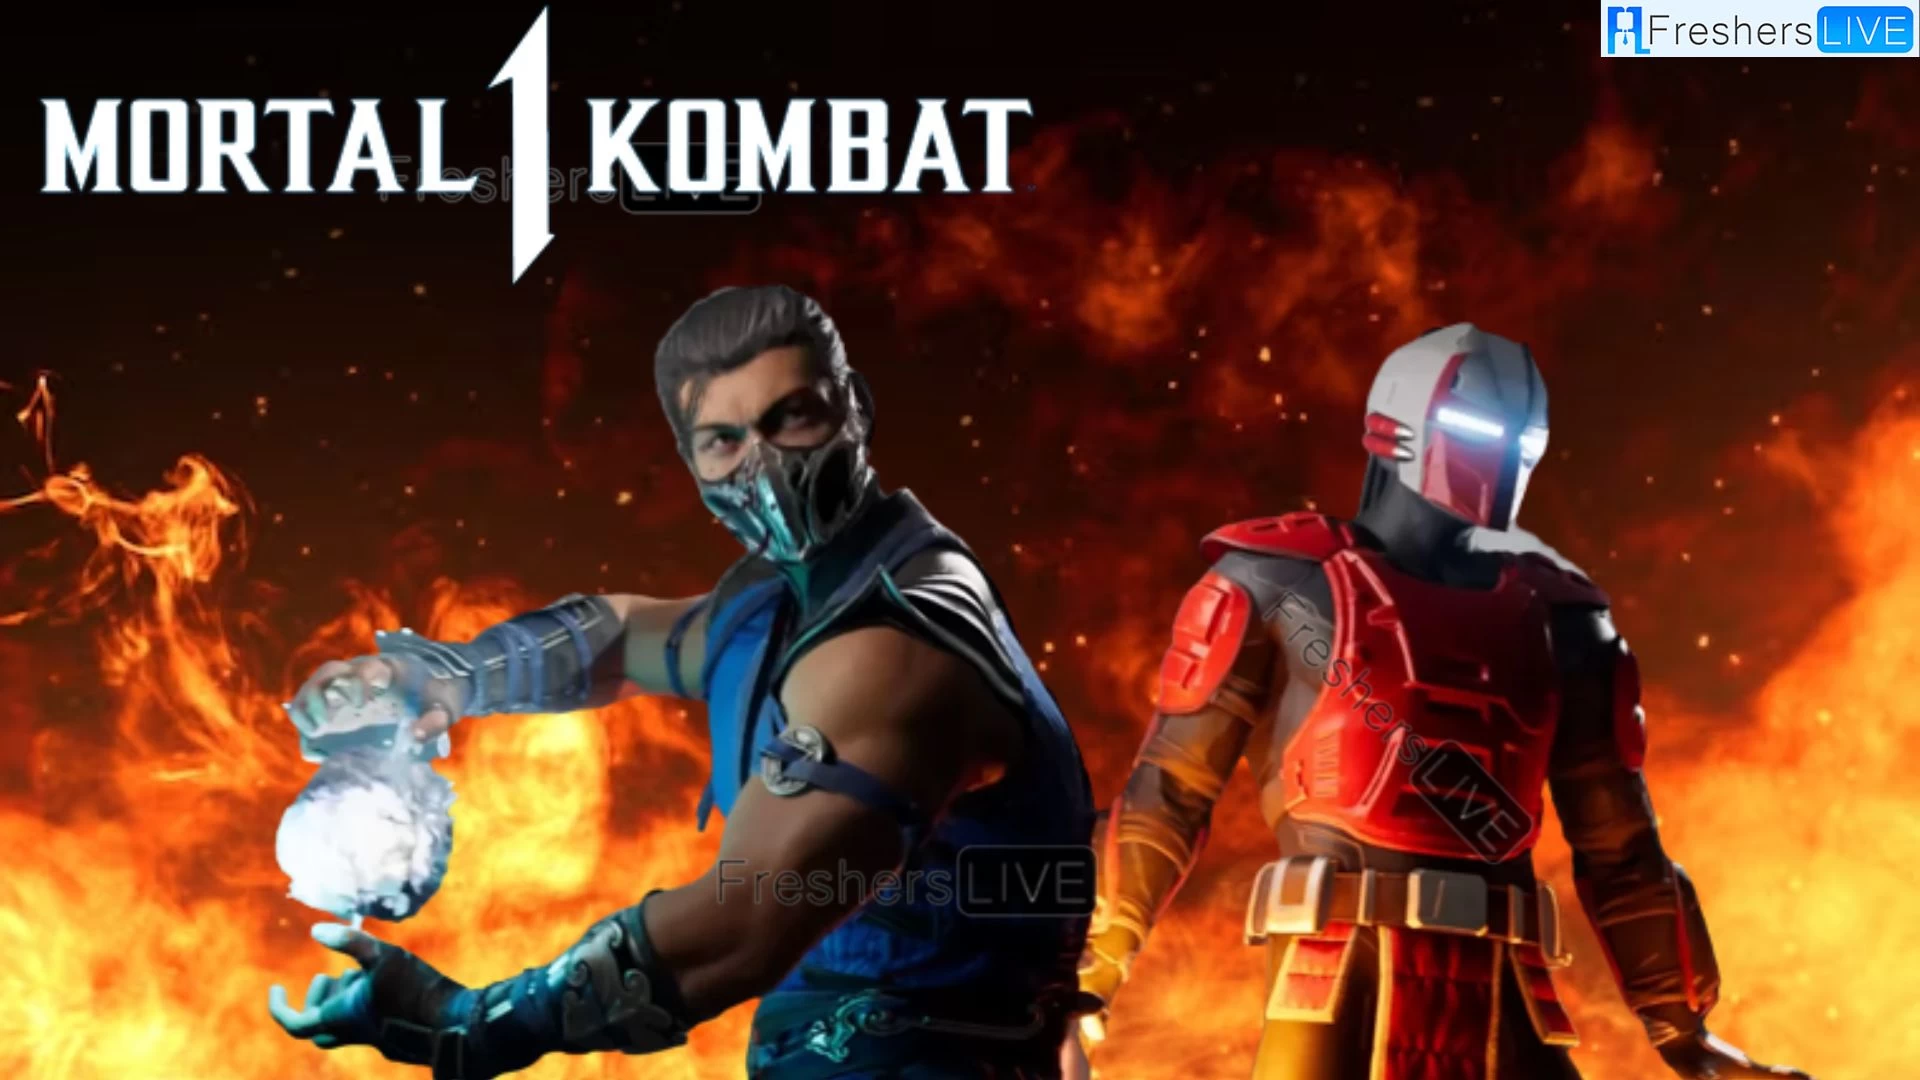 Mortal Kombat 1 Switch Graphics Comparison, Gameplay and Trailer